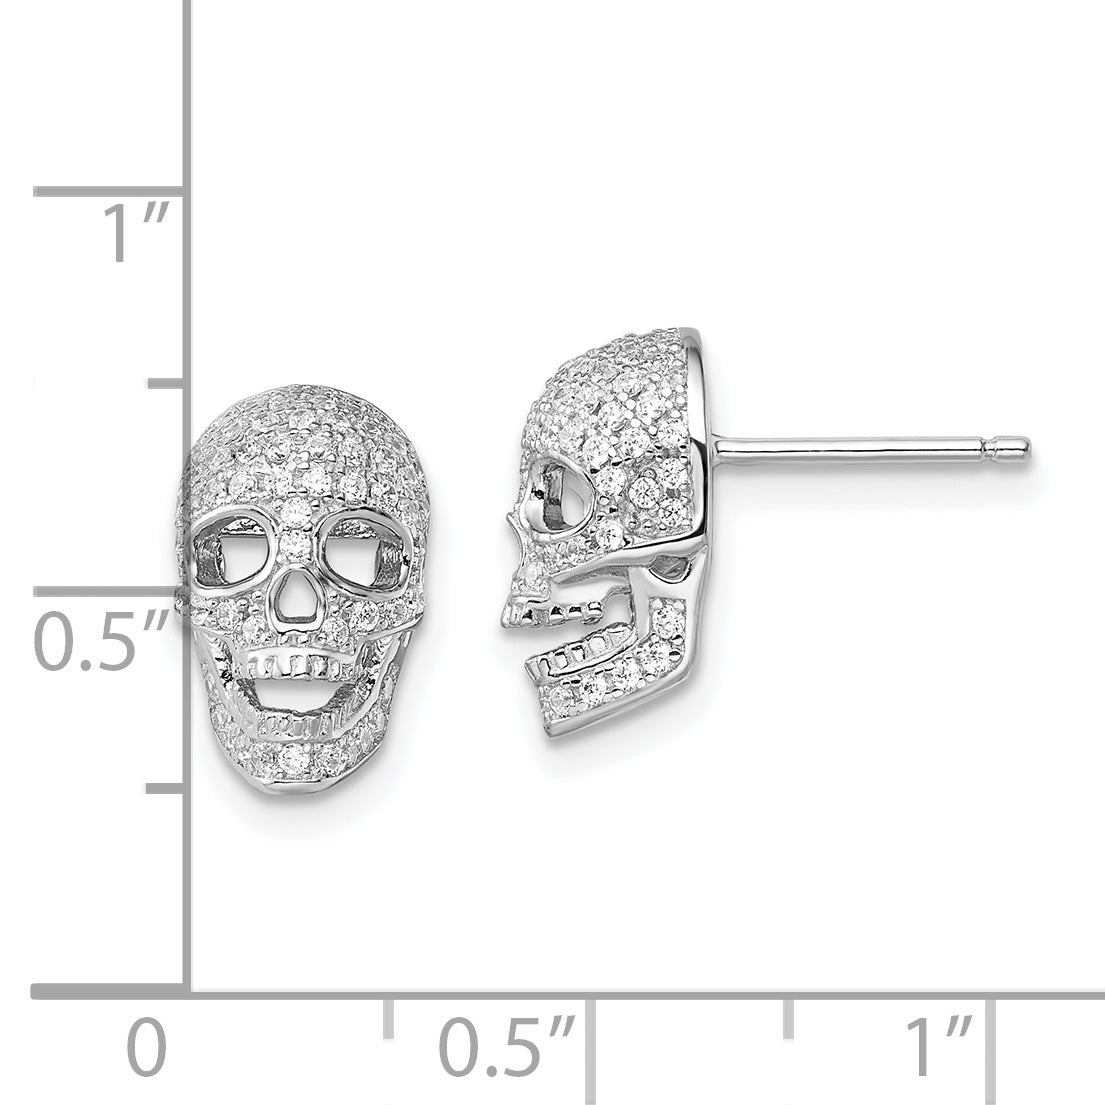 Brilliant Embers Sterling Silver Rhodium-plated 140 Stone Micro Pav‚ CZ Polished Skull Post Earrings